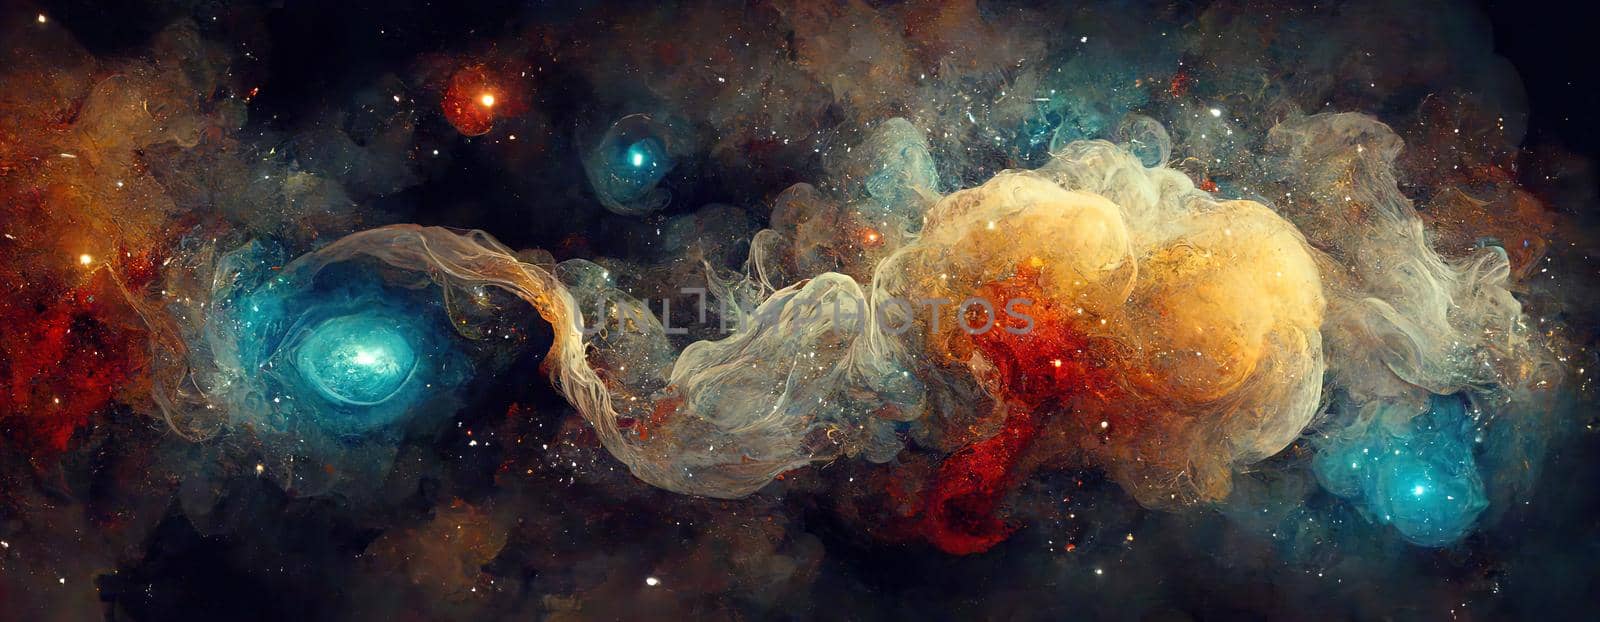 abstract space theme with galaxies and stars and nebulae.